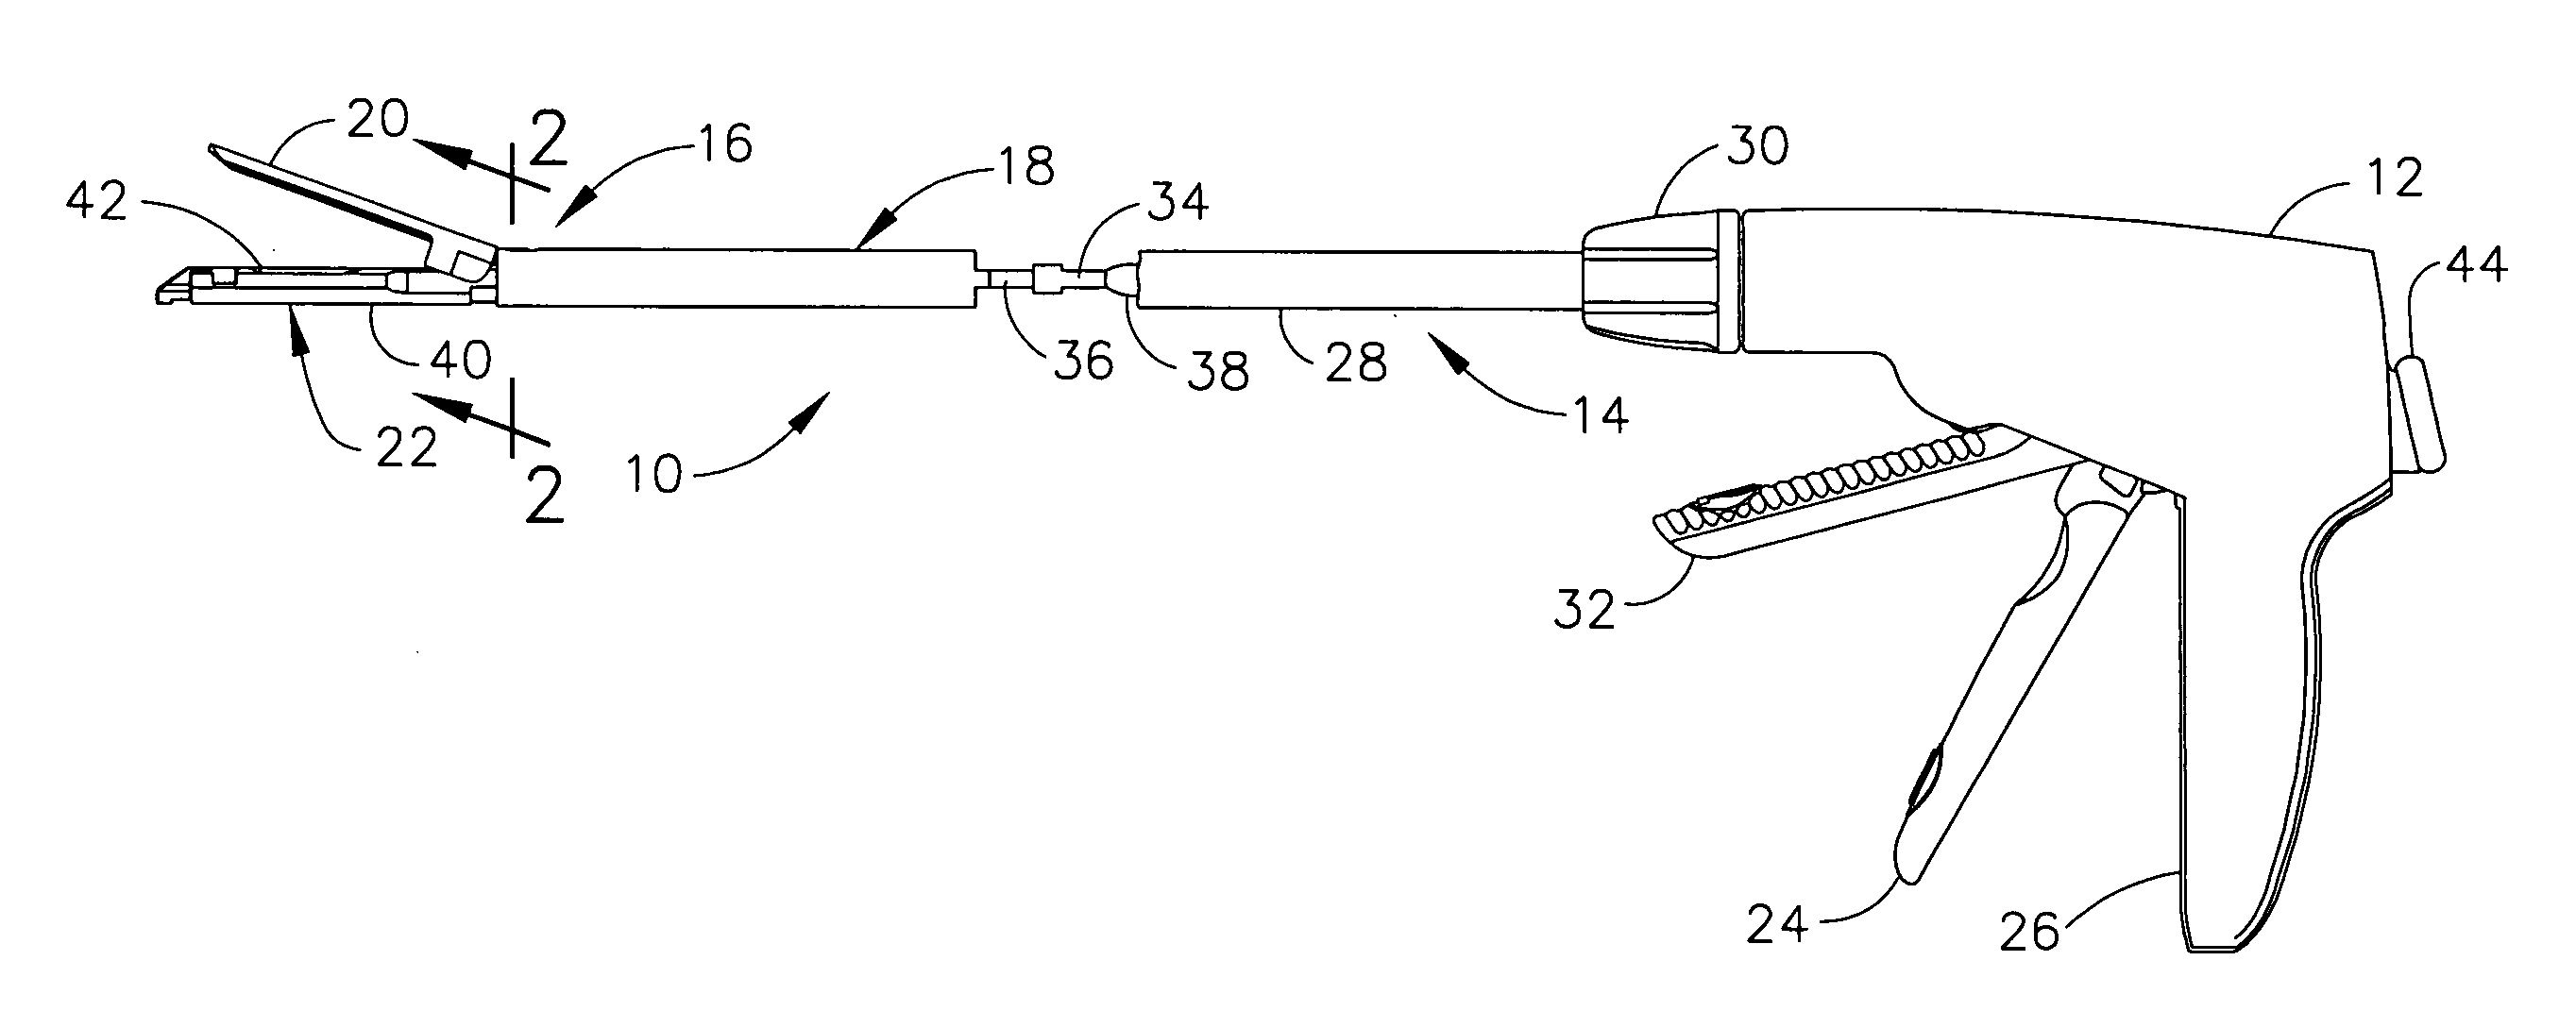 Surgical cutting and stapling device with closure apparatus for limiting maximum tissue compression force